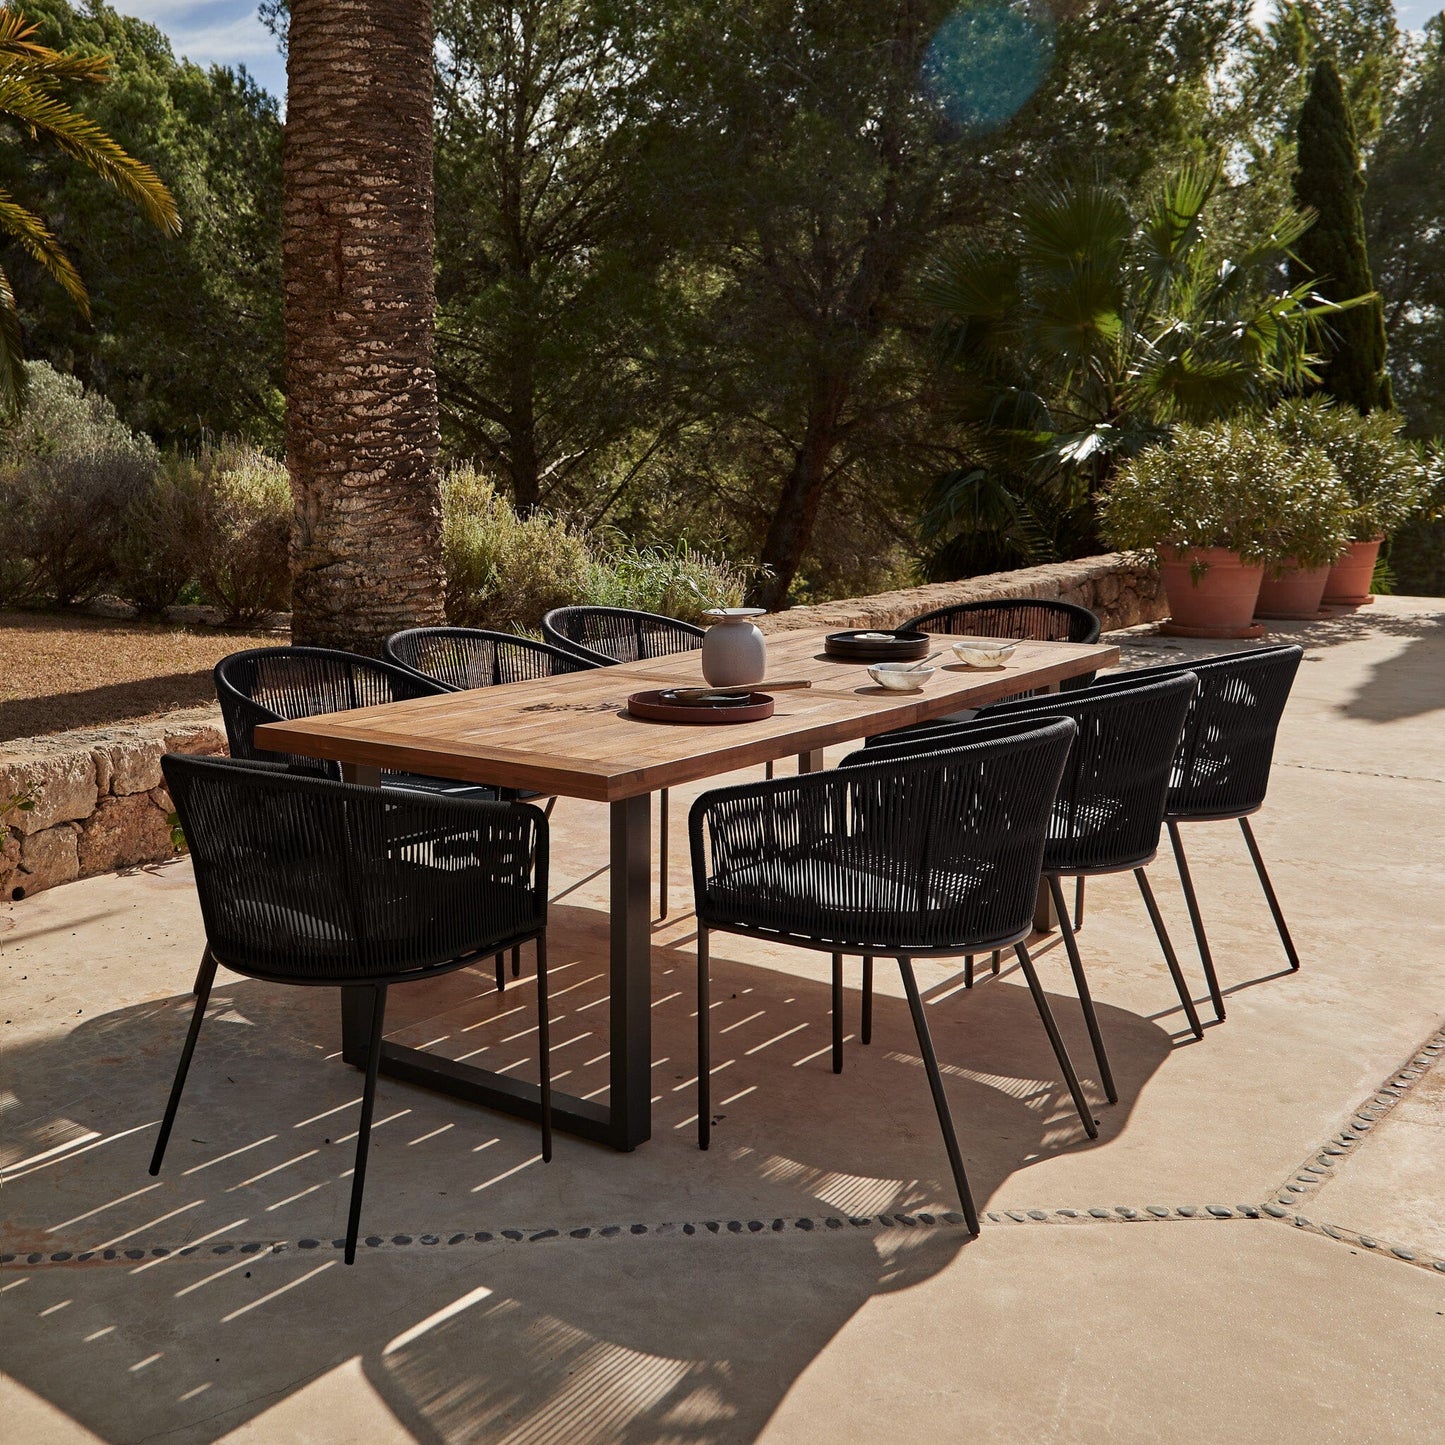 Hali 8 Seater Wooden Outdoor Dining Set with Hali Black Chairs - 235cm